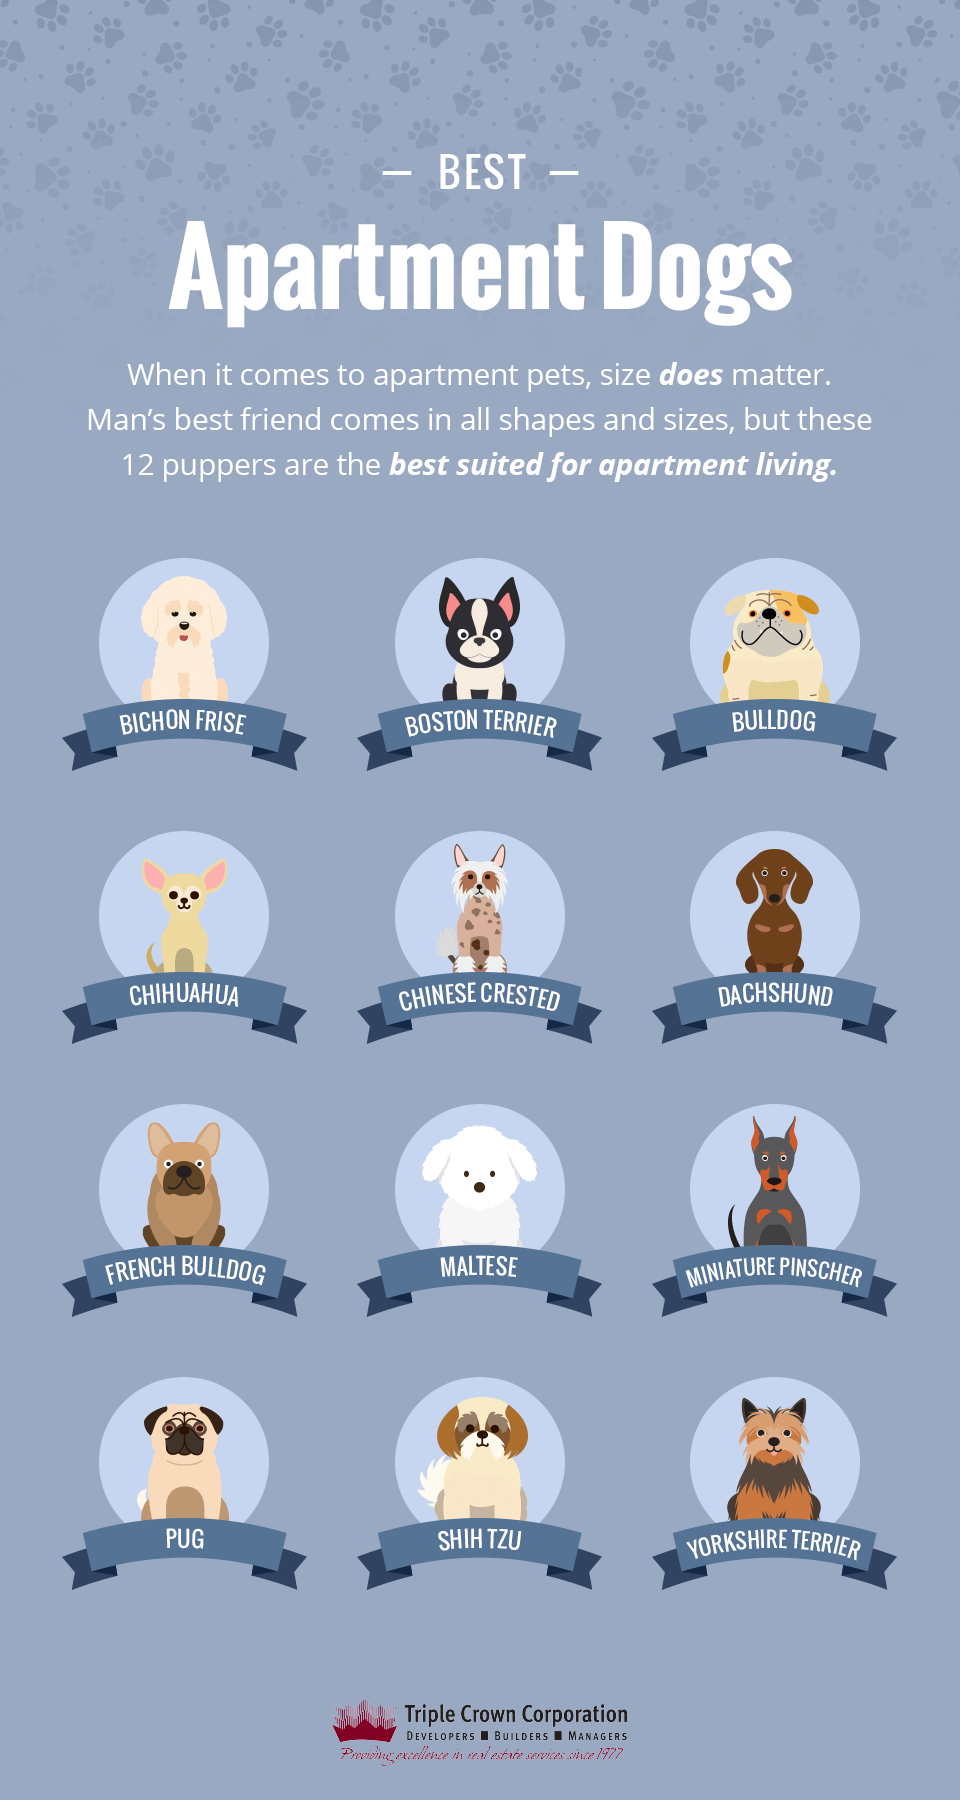 Best Apartment Dogs